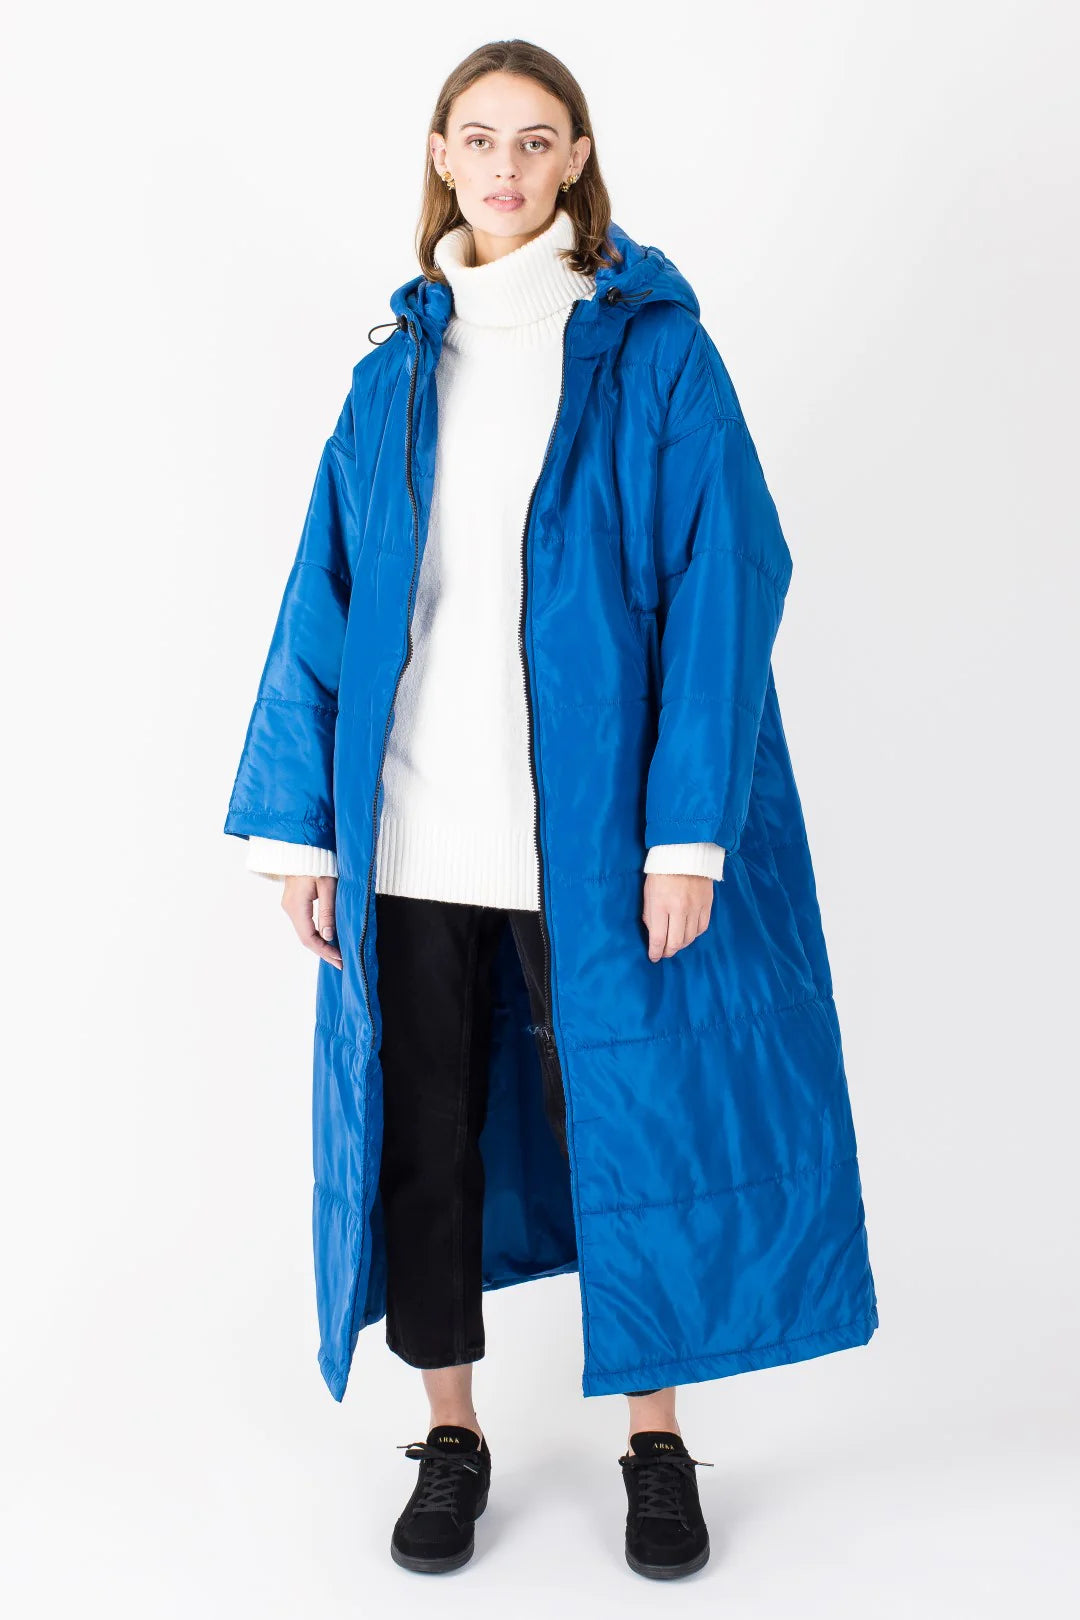 Sittingsuit, the wearable blanket, Classic Blue